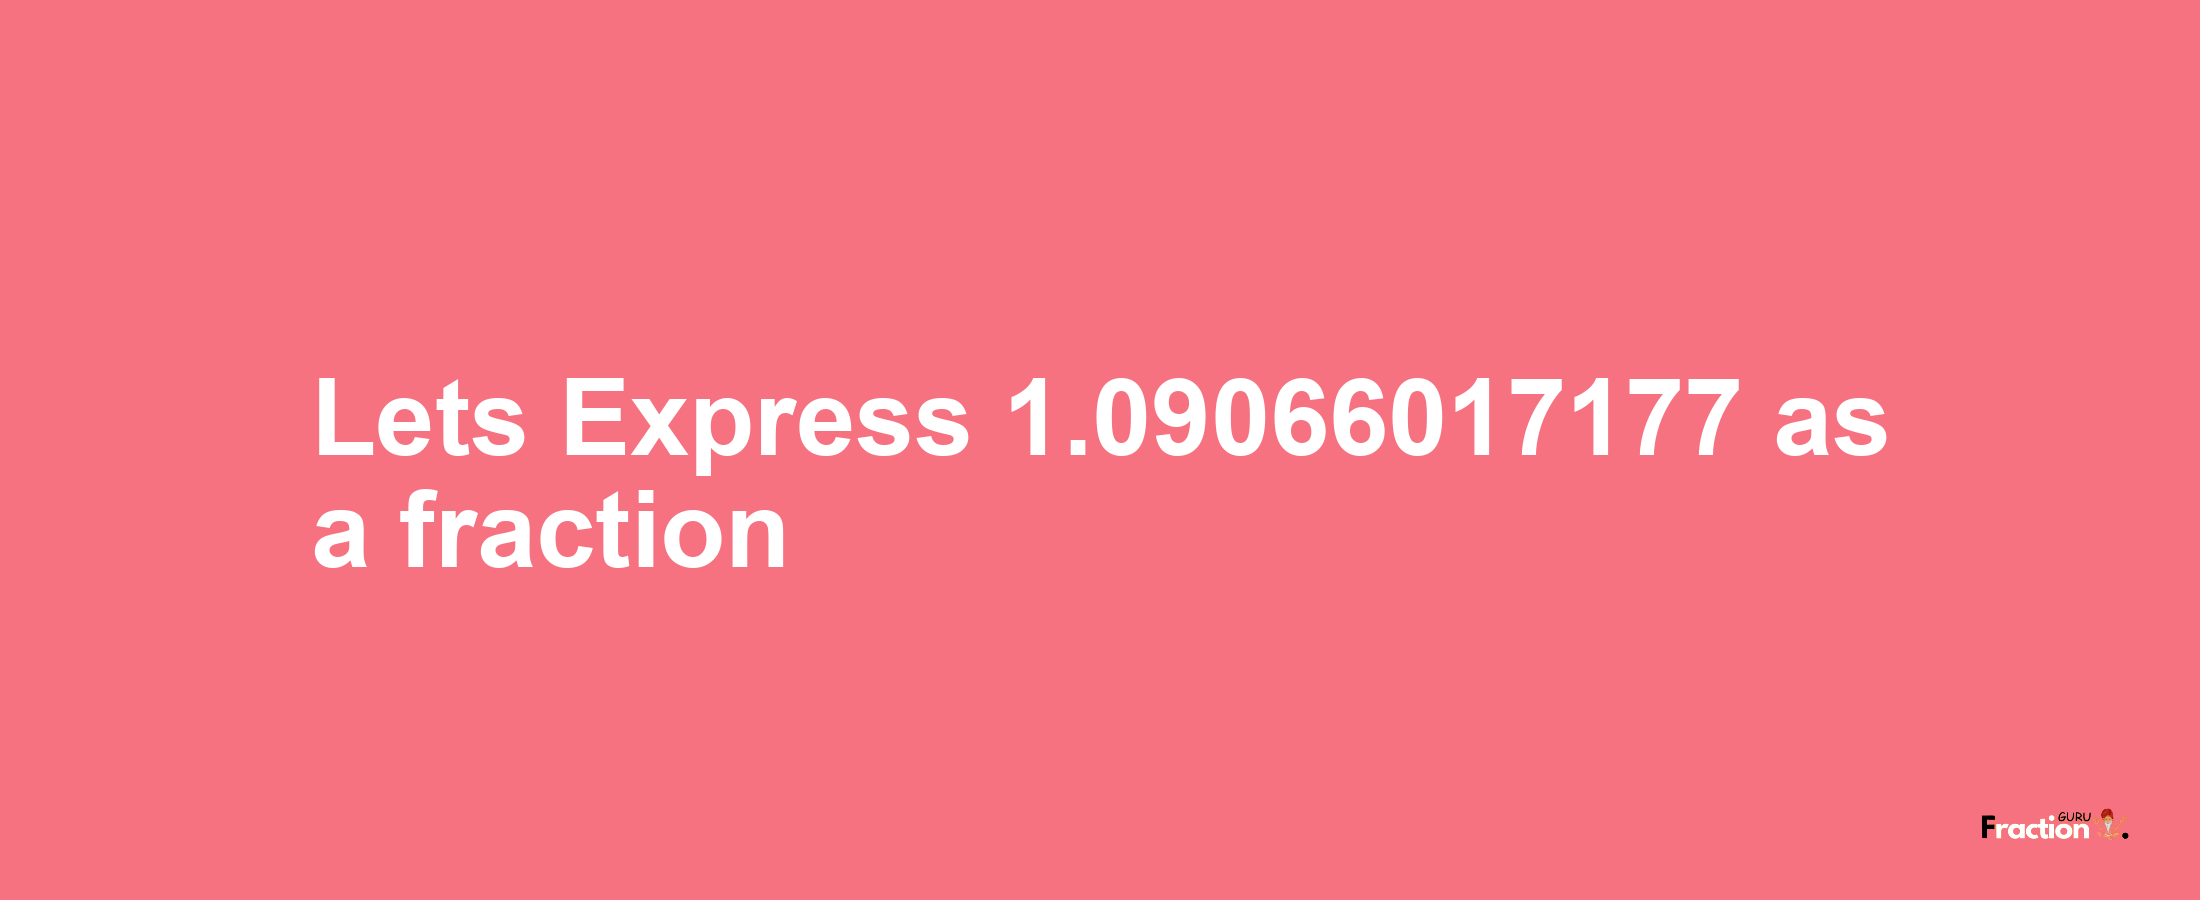 Lets Express 1.09066017177 as afraction